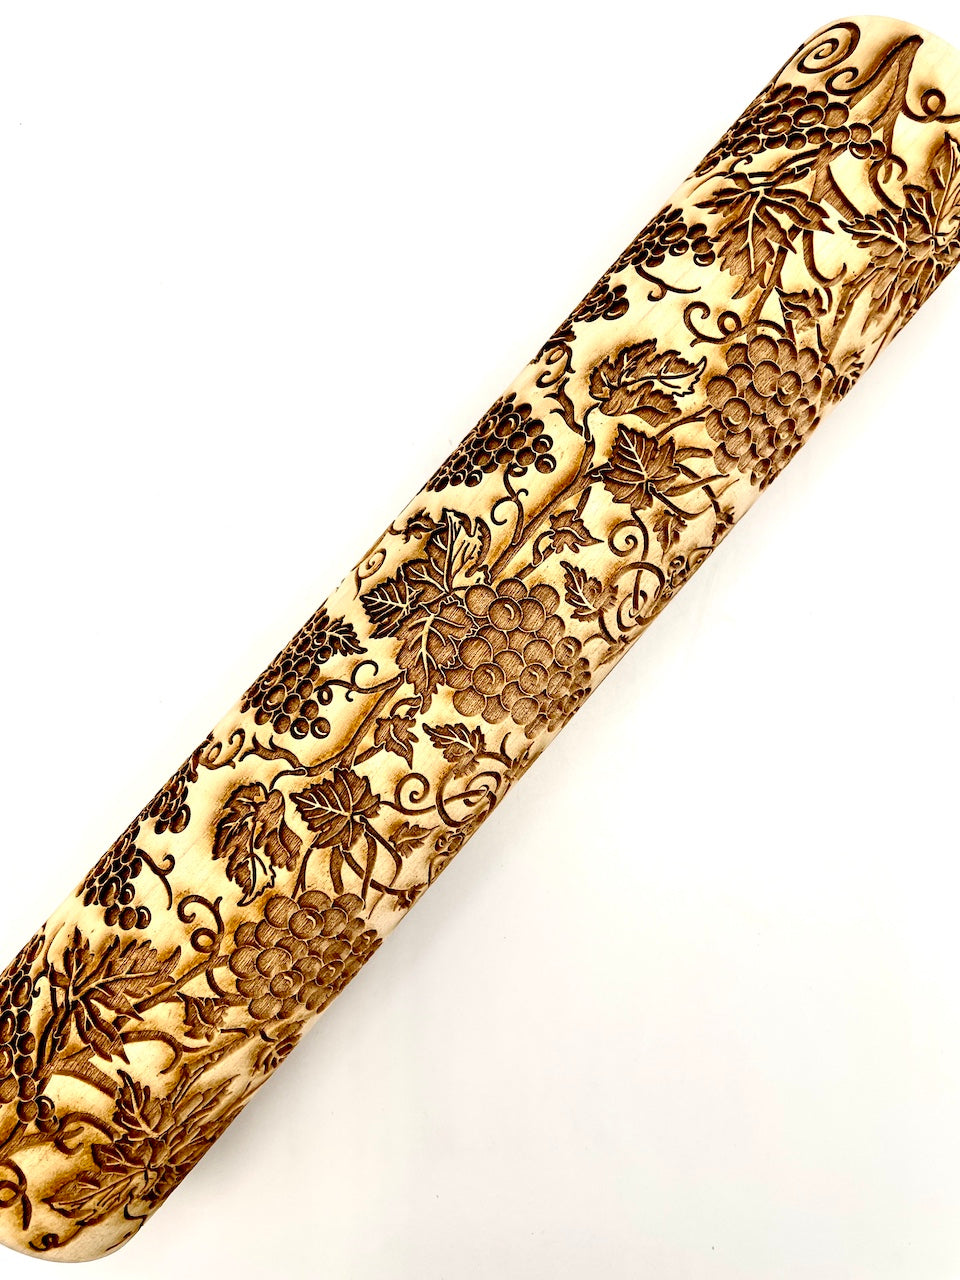 Grapes & Vines Textured Rolling Pin- WITHOUT Wine Barrel Motif (Style 2)